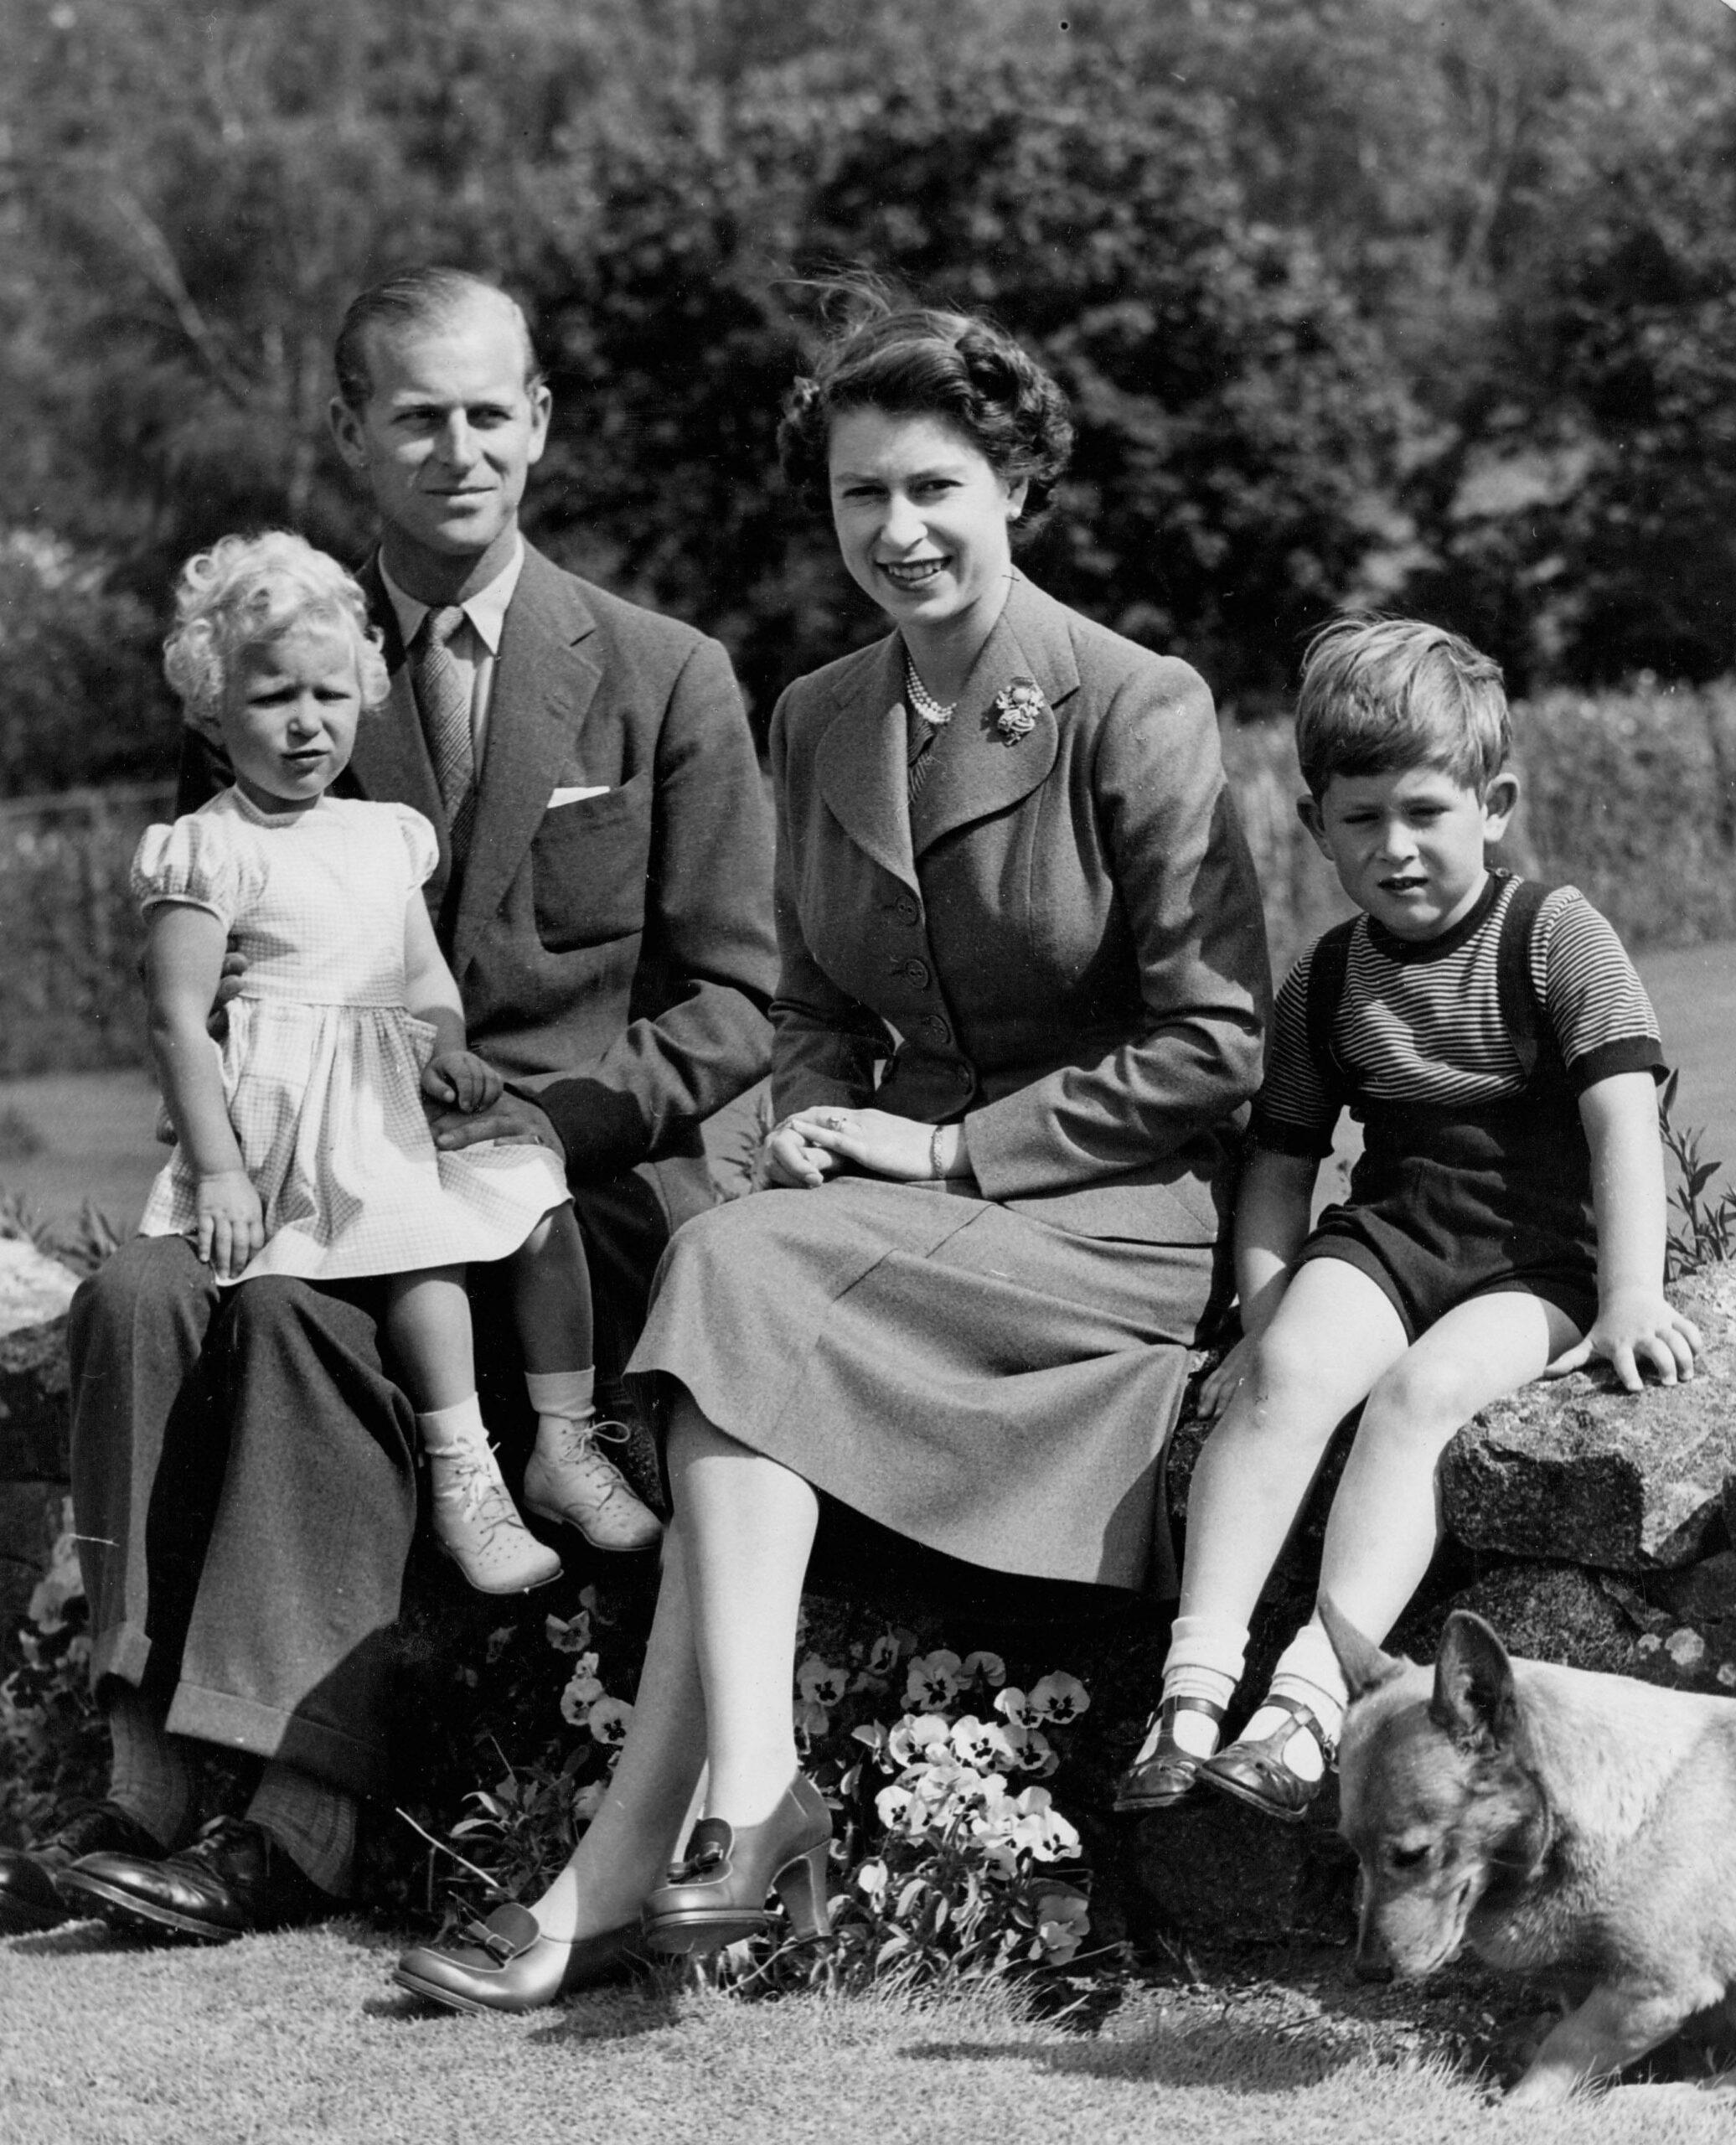 A portrait of the British Royal family including, from left, PRINCESS ANNE, PRINCE PHILIP, QUEEN ELIZABETH II, PRINCE CHARLES and one of the royal pet Corgis.